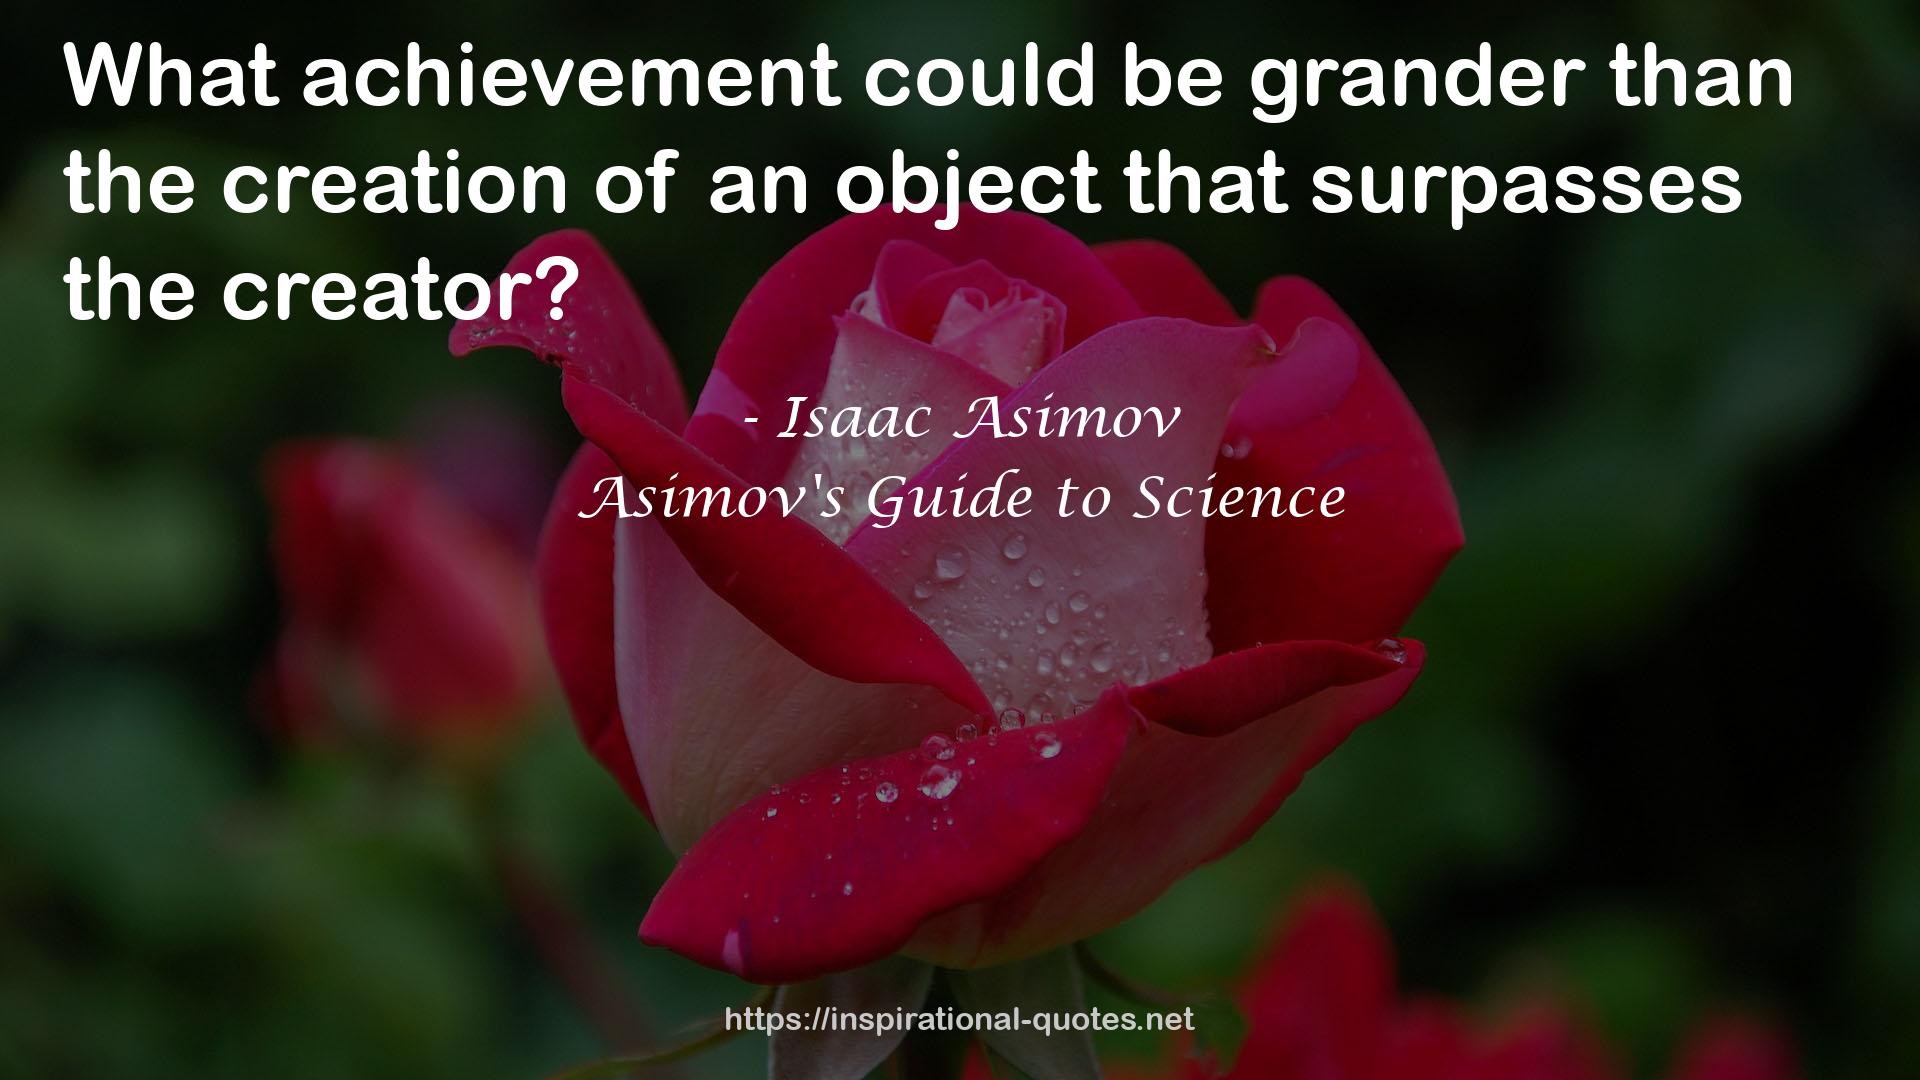 Asimov's Guide to Science QUOTES